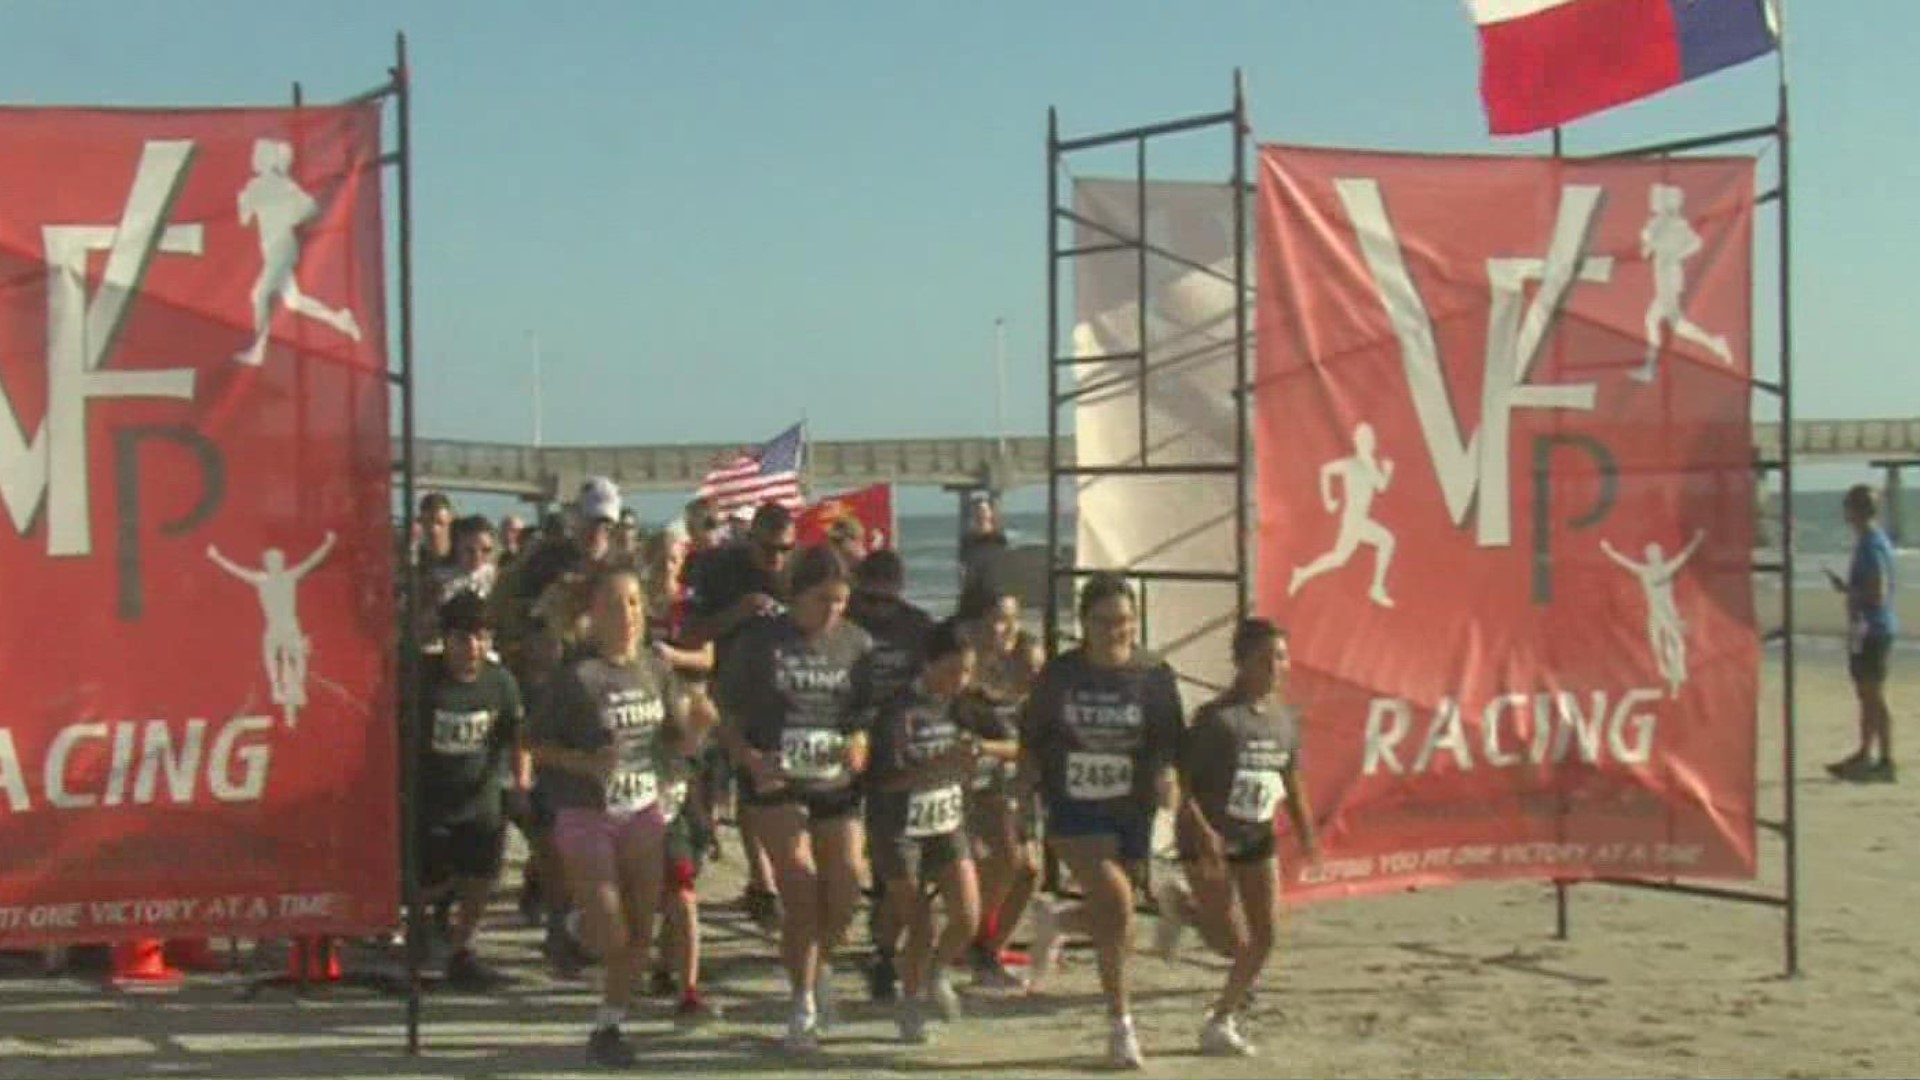 The annual run was organized in 2018 by The Wingman Foundation and began as a way to honor fallen U.S. Marine Capt. Jake “Red Stripe” Frederick, and his legacy.